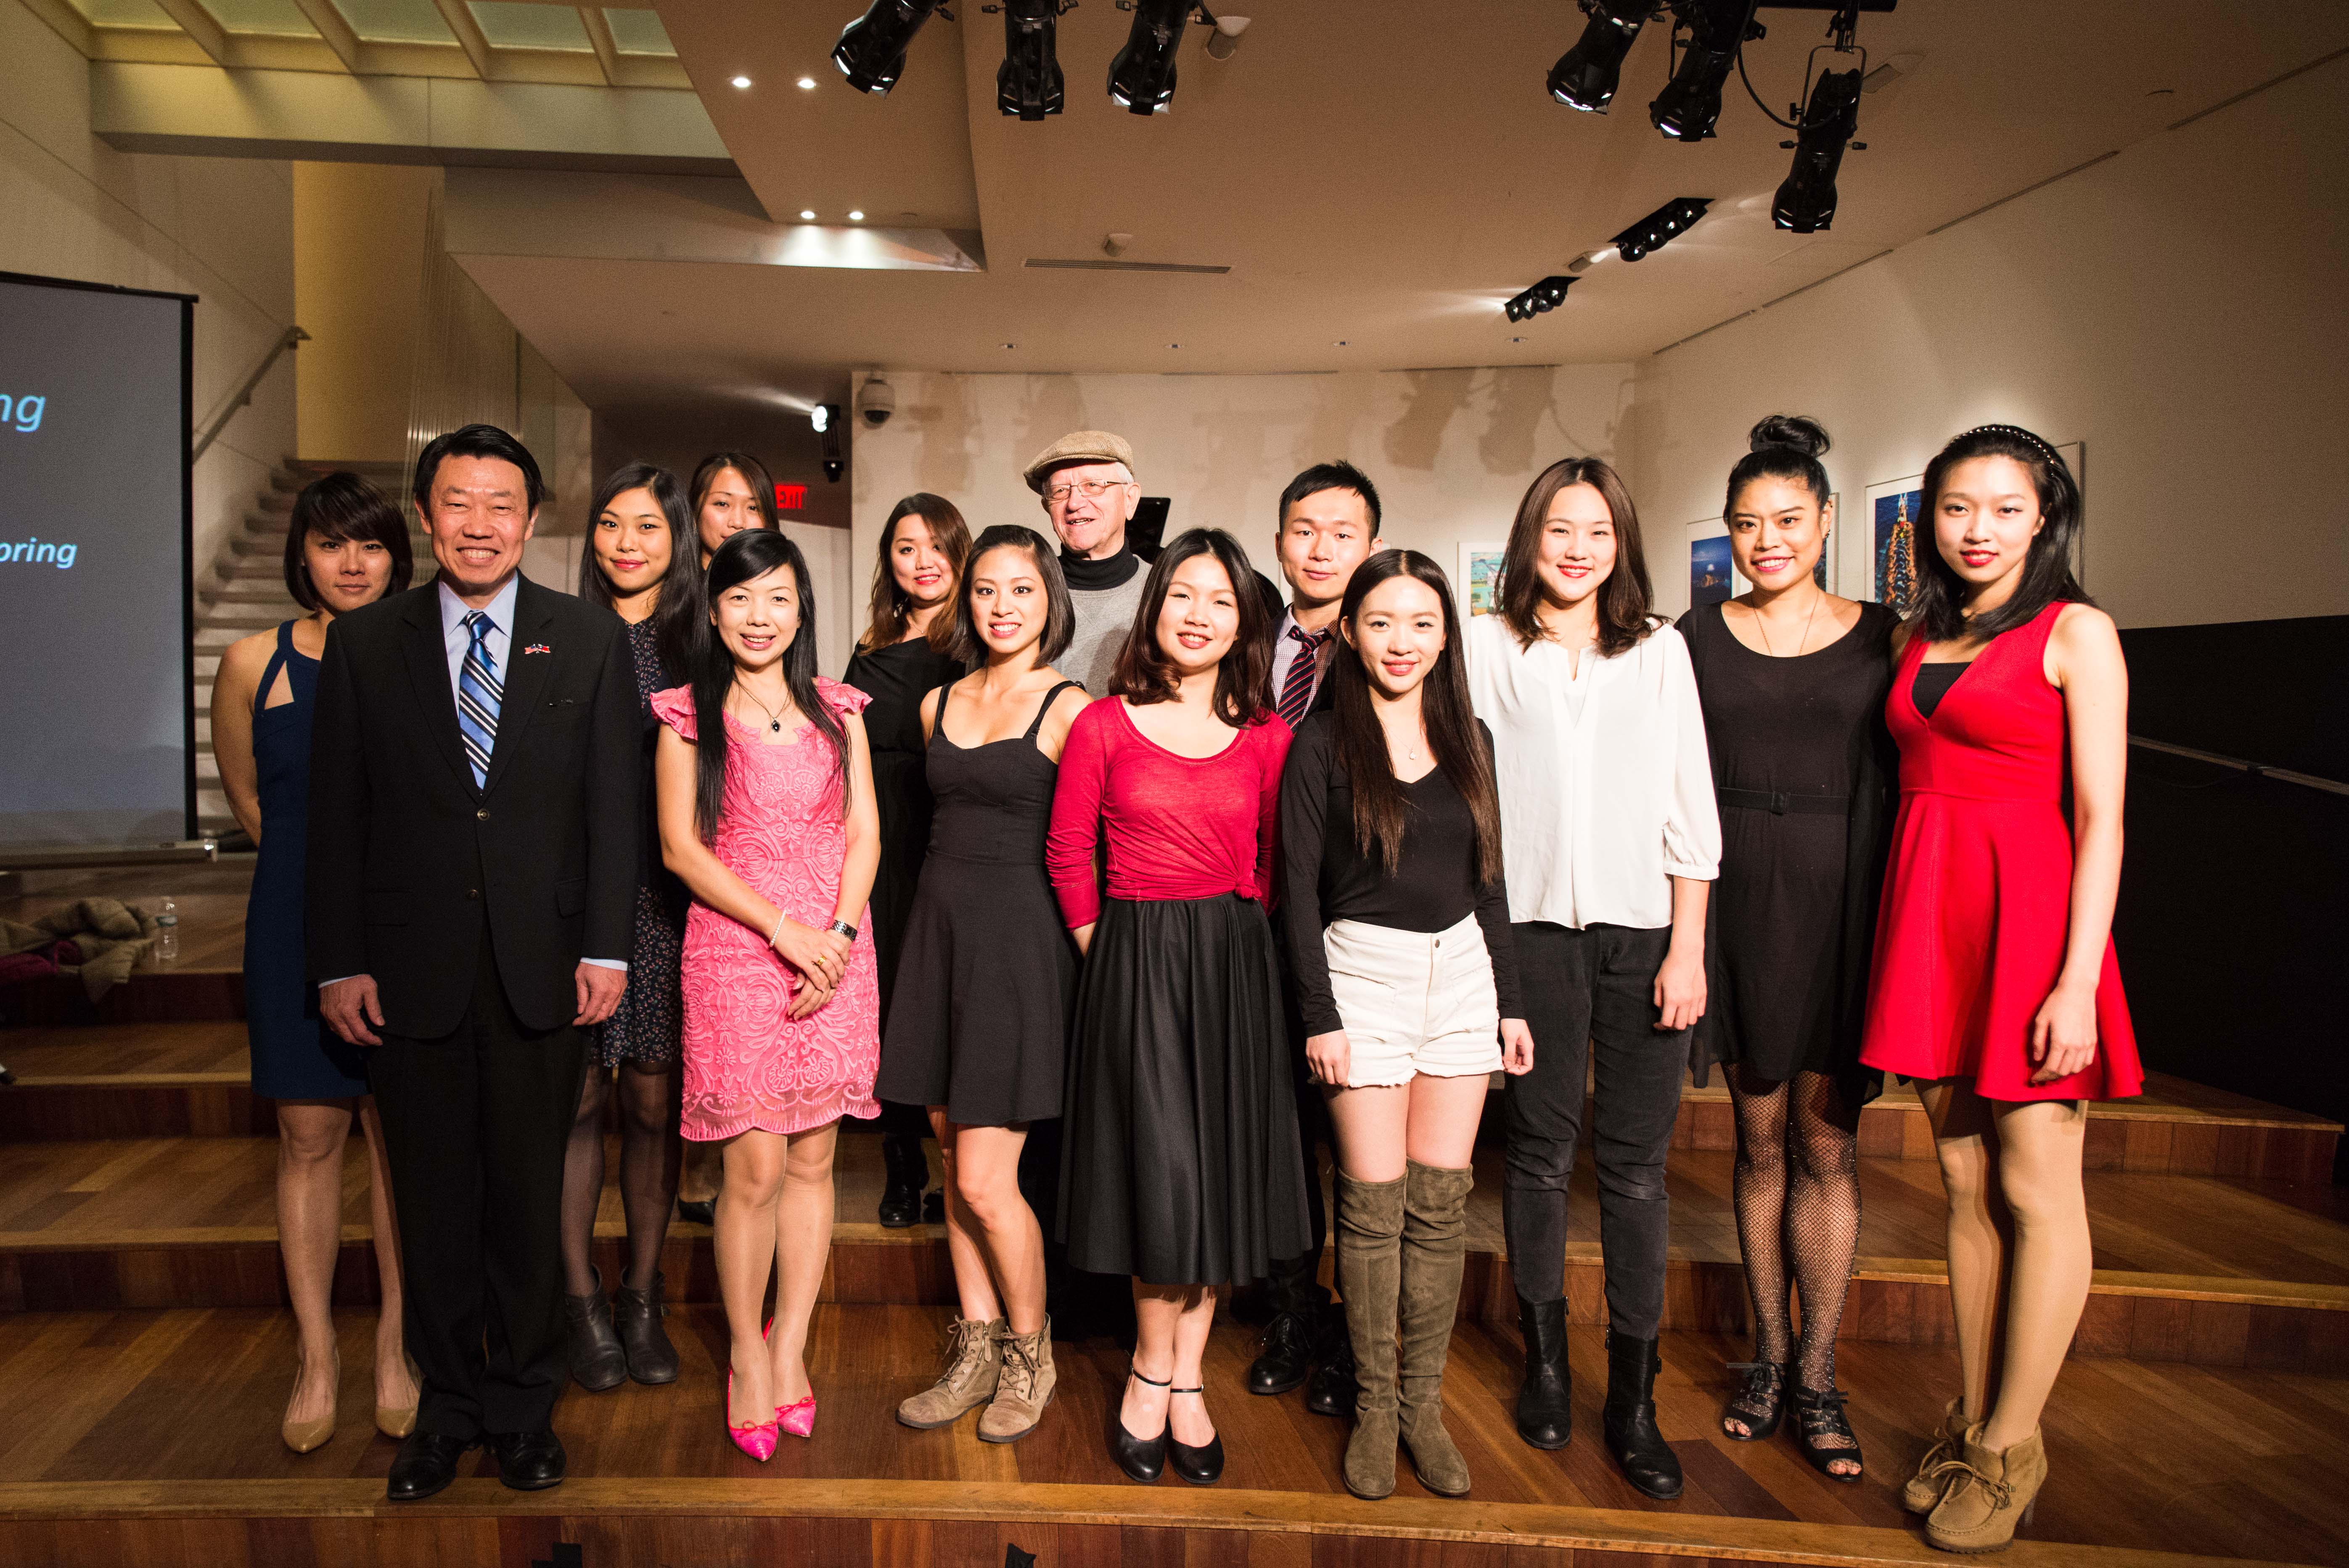 Education Division-NY gives a “Salute To Broadway”: its first-ever cabaret produced by students from Taiwan